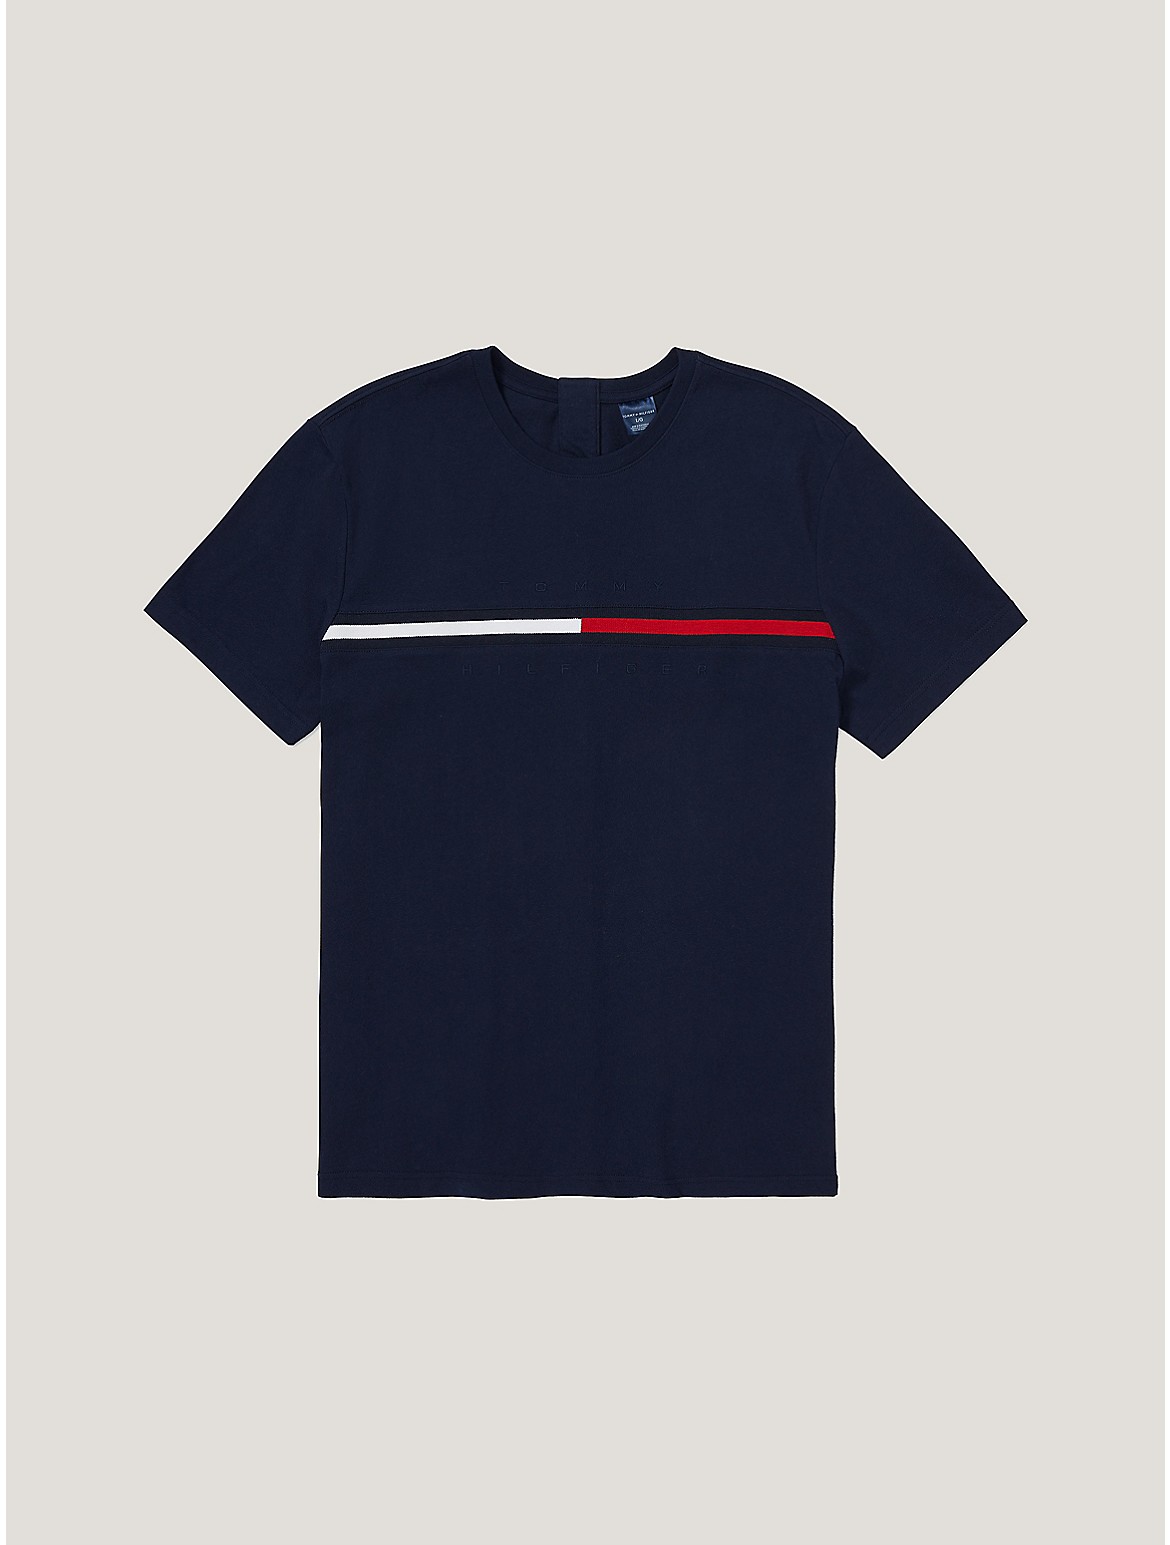 Tommy Hilfiger Men's Seated Fit Signature Stripe T-Shirt